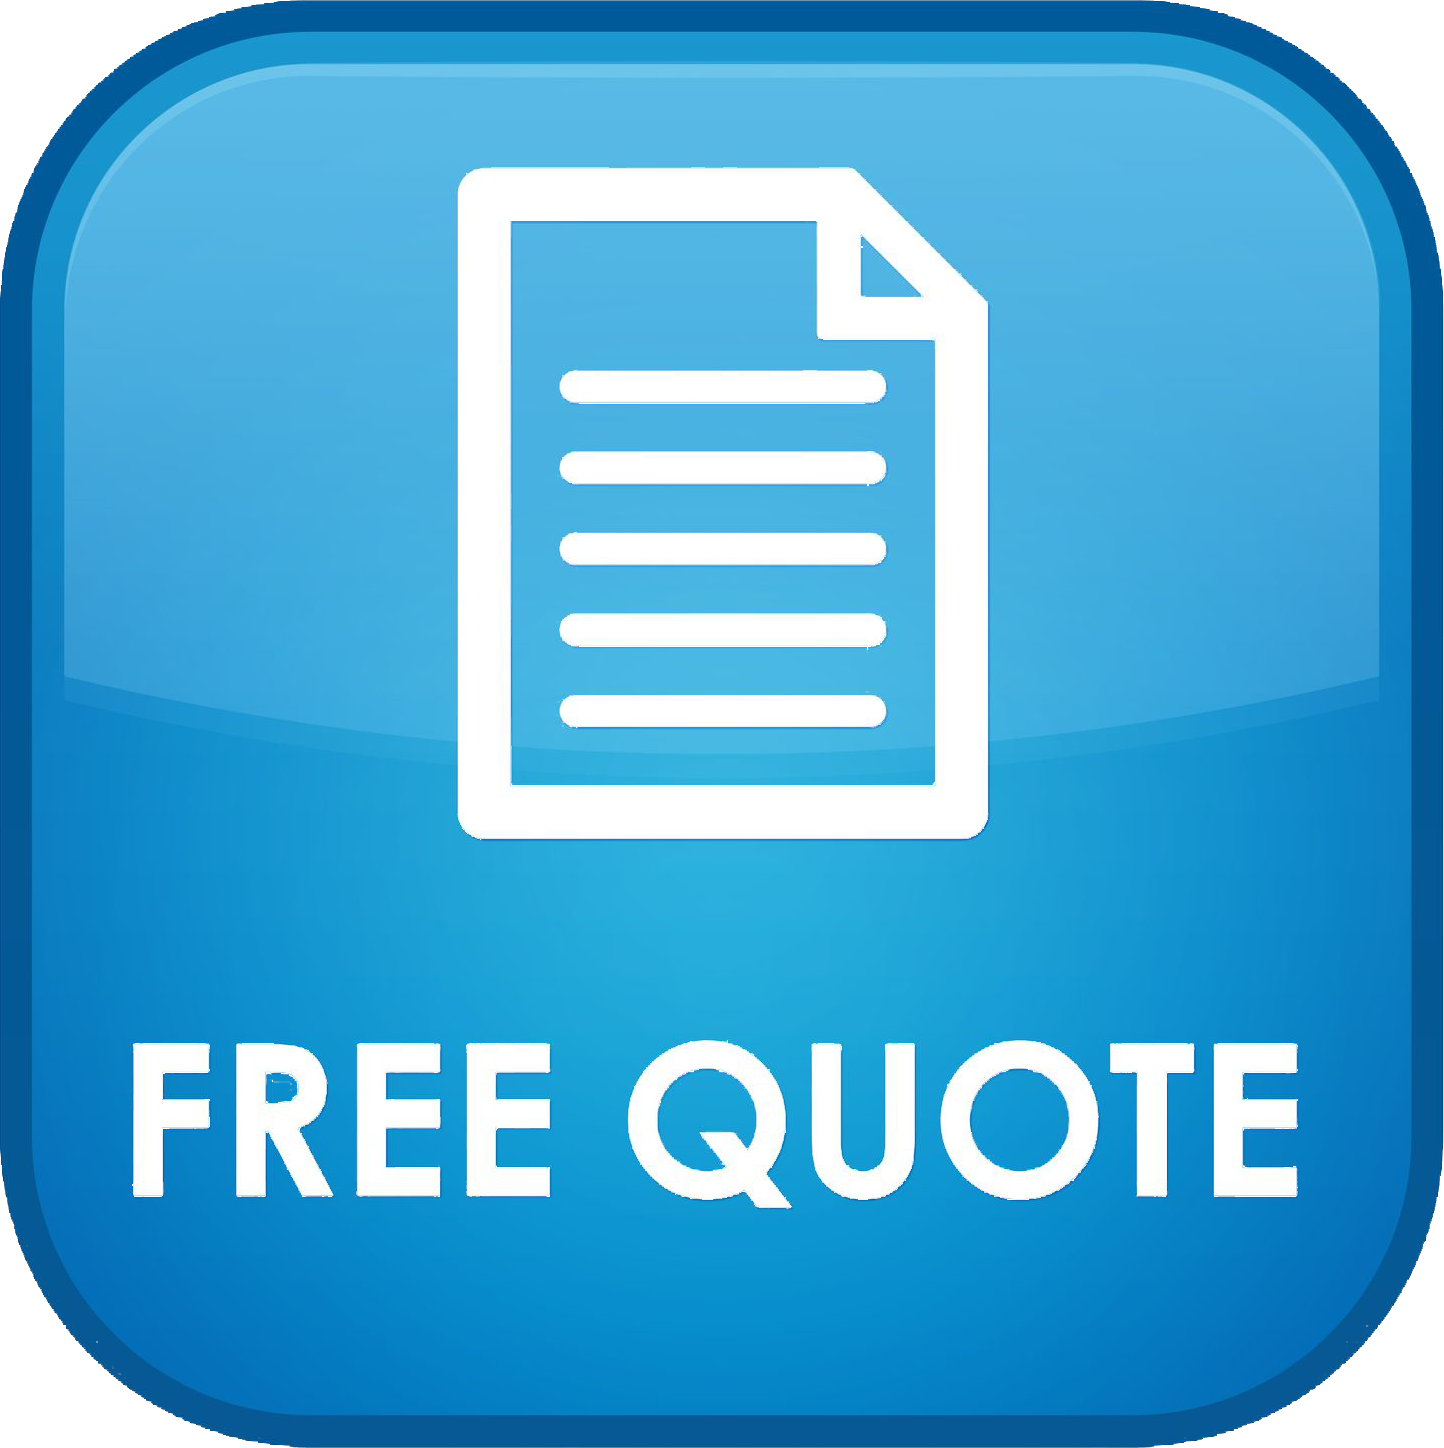 FREE QUOTE NO BACK